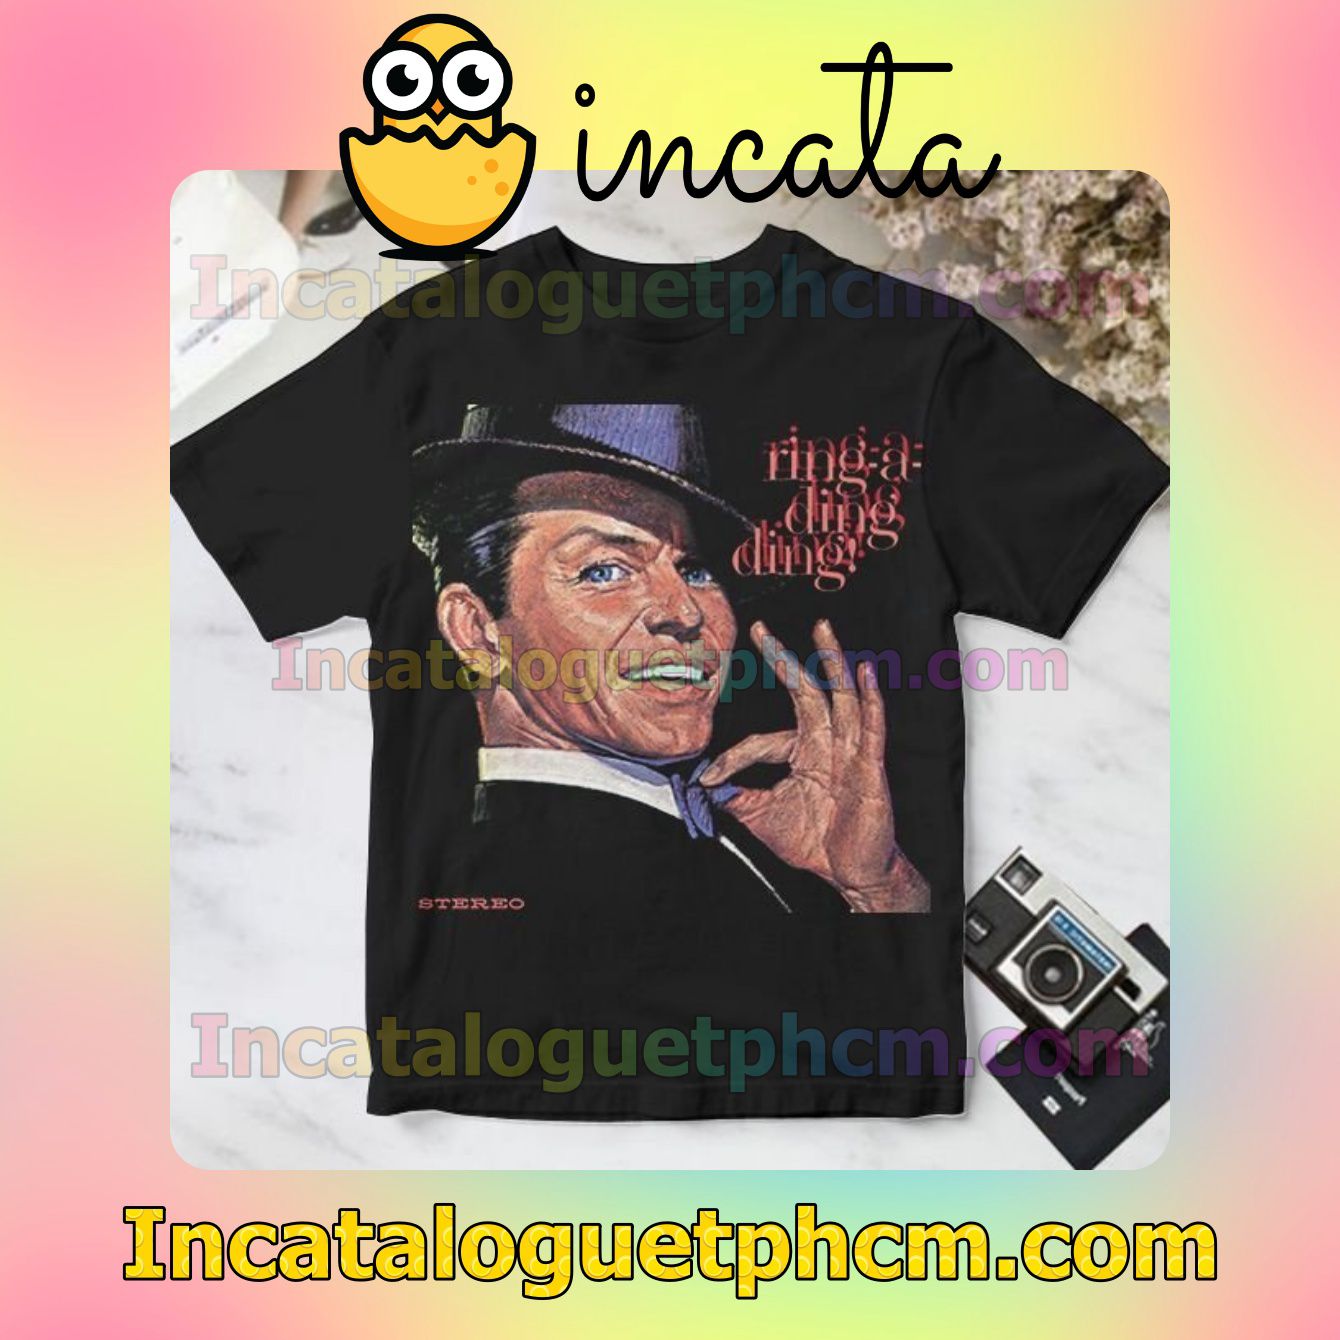 Frank Sinatra Ring A Ding Ding Album Cover Personalized Shirt